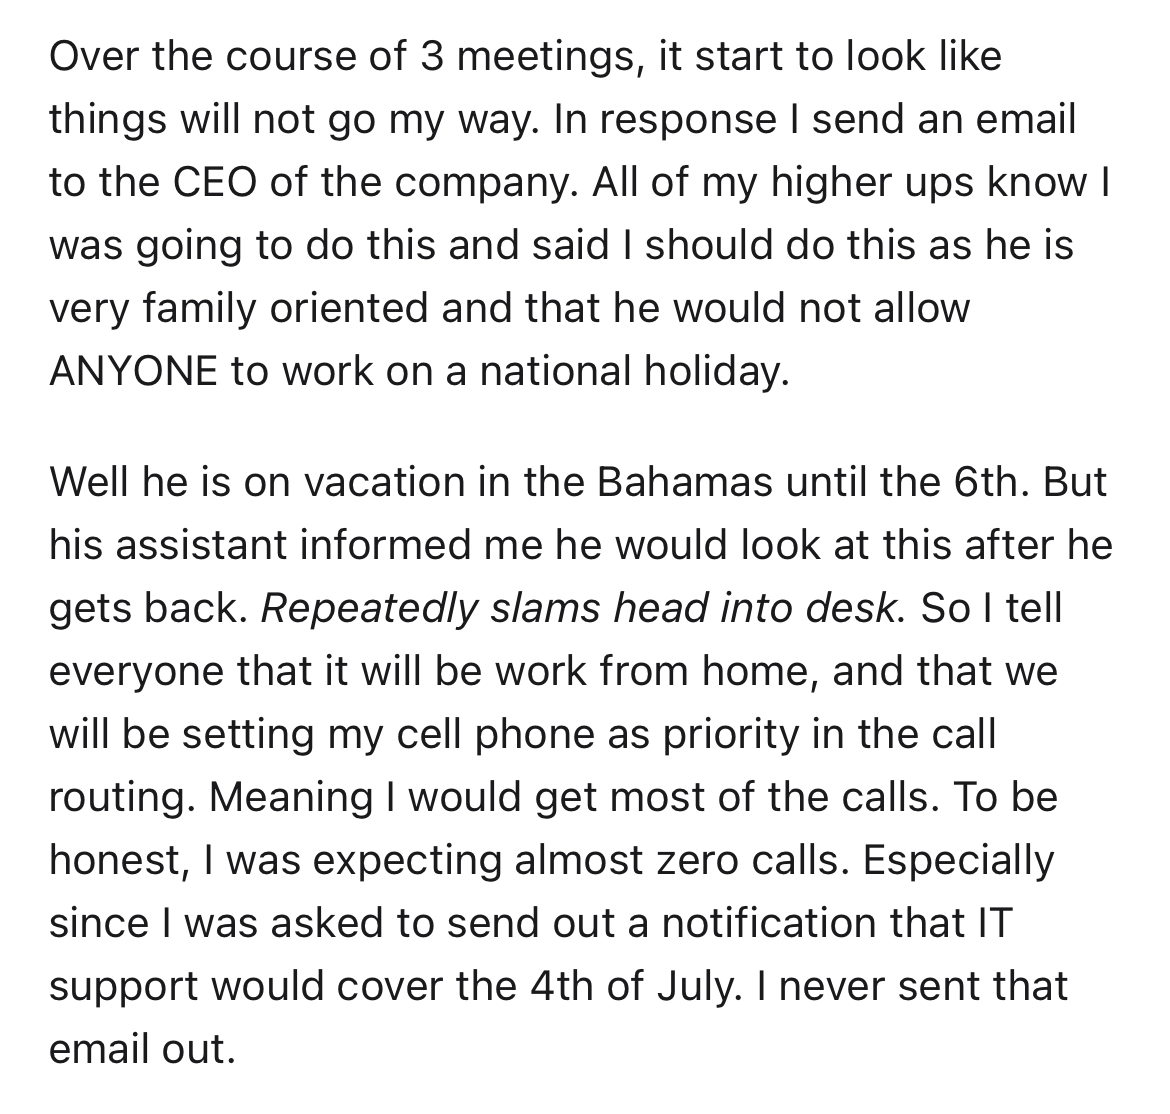 employees throw $6k 4th of July party at work -angle - Over the course of 3 meetings, it start to look things will not go my way. In response I send an email to the Ceo of the company. All of my higher ups know I was going to do this and said I should do 